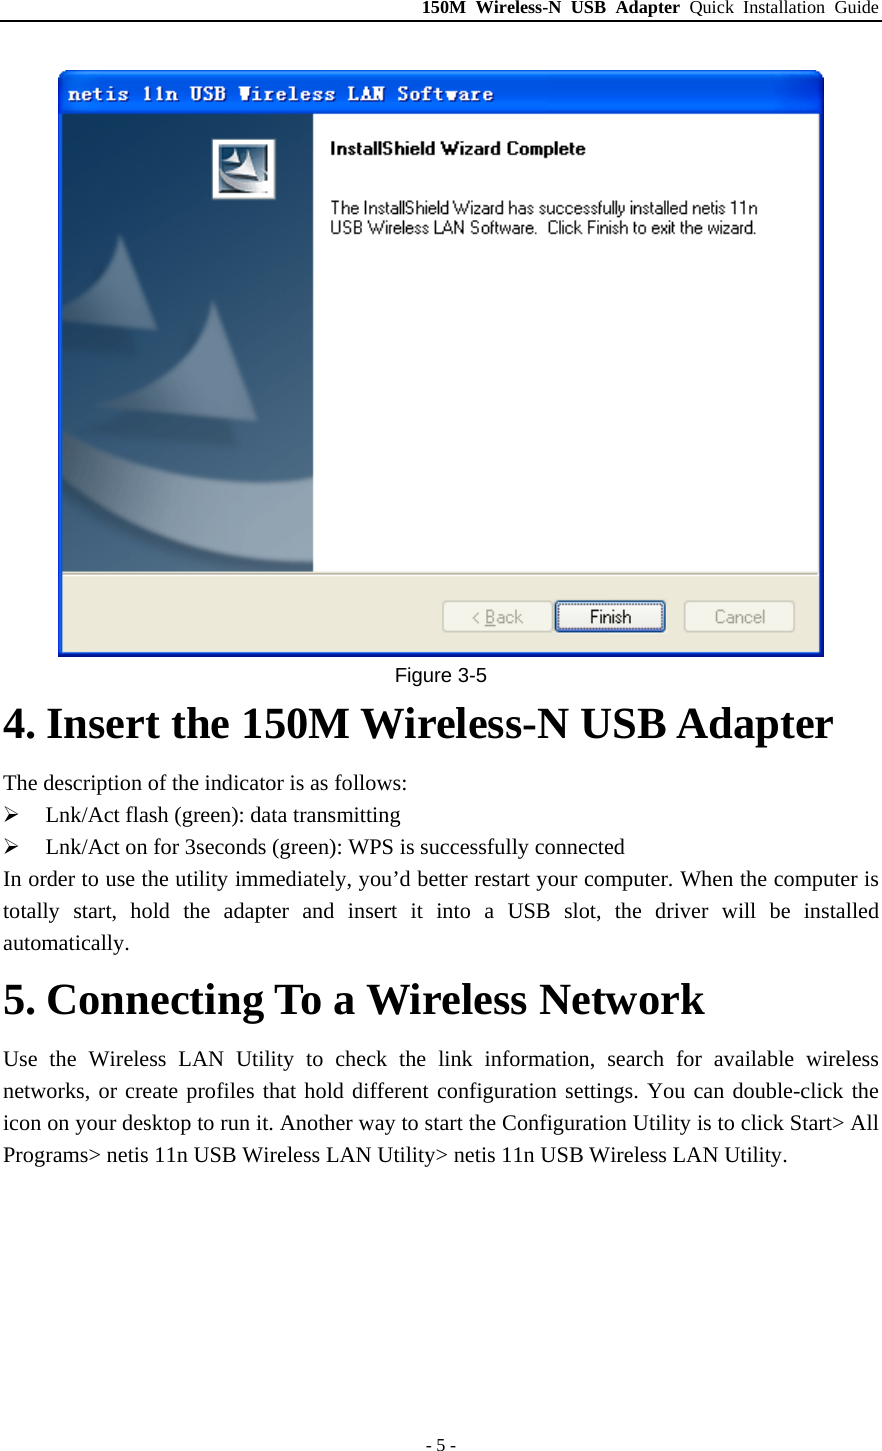 150M Wireless-N USB Adapter Quick Installation Guide - 5 -  Figure 3-5 4. Insert the 150M Wireless-N USB Adapter The description of the indicator is as follows: ¾ Lnk/Act flash (green): data transmitting ¾ Lnk/Act on for 3seconds (green): WPS is successfully connected In order to use the utility immediately, you’d better restart your computer. When the computer is totally start, hold the adapter and insert it into a USB slot, the driver will be installed automatically. 5. Connecting To a Wireless Network Use the Wireless LAN Utility to check the link information, search for available wireless networks, or create profiles that hold different configuration settings. You can double-click the icon on your desktop to run it. Another way to start the Configuration Utility is to click Start&gt; All Programs&gt; netis 11n USB Wireless LAN Utility&gt; netis 11n USB Wireless LAN Utility. 